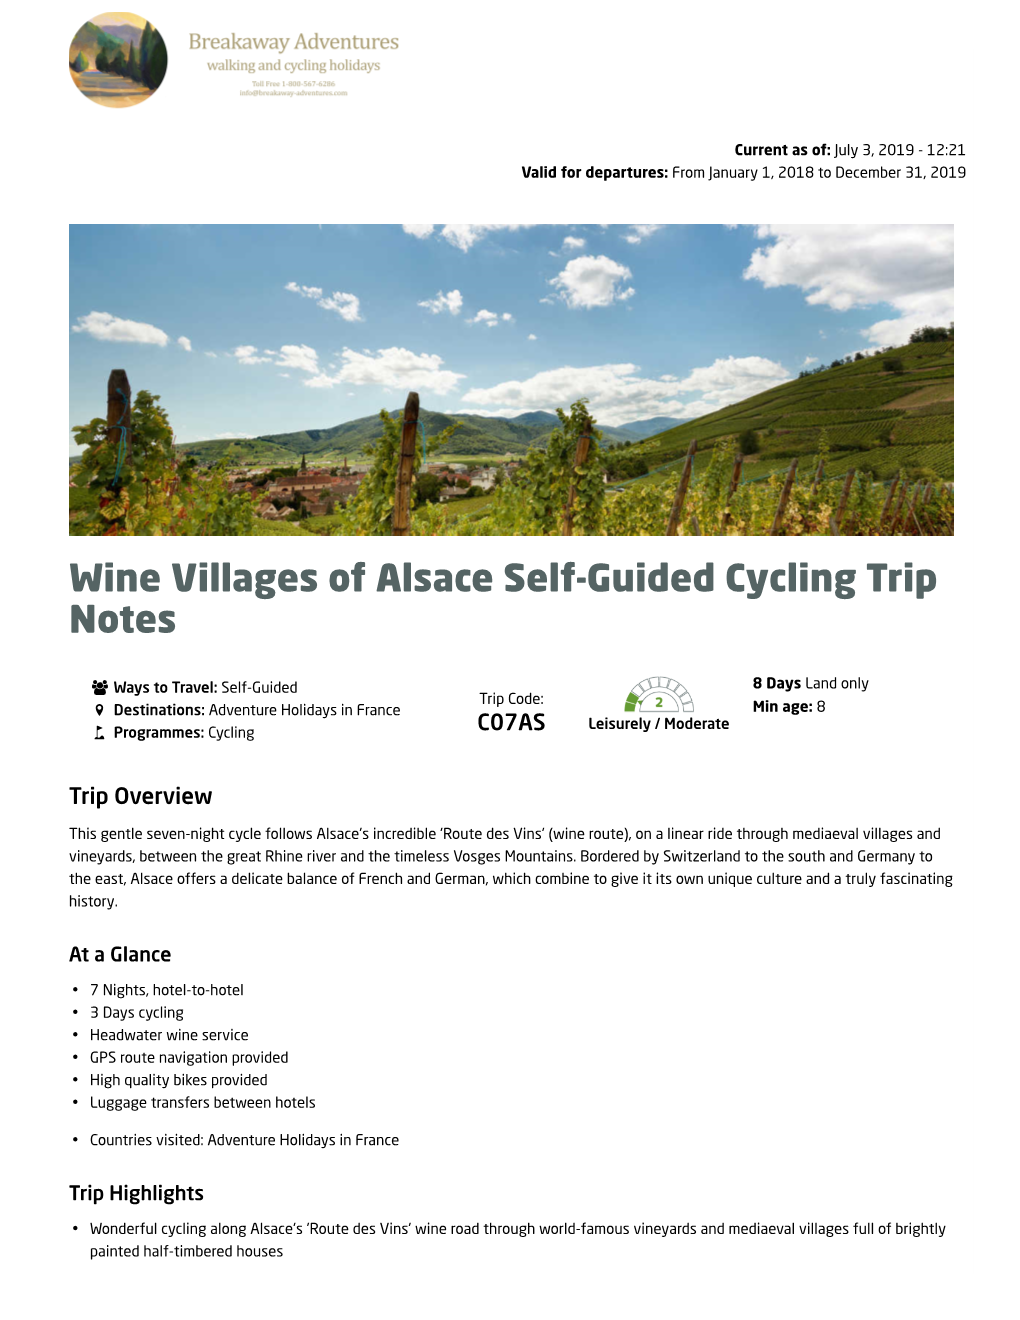 Wine Villages of Alsace Self-Guided Cycling Trip Notes